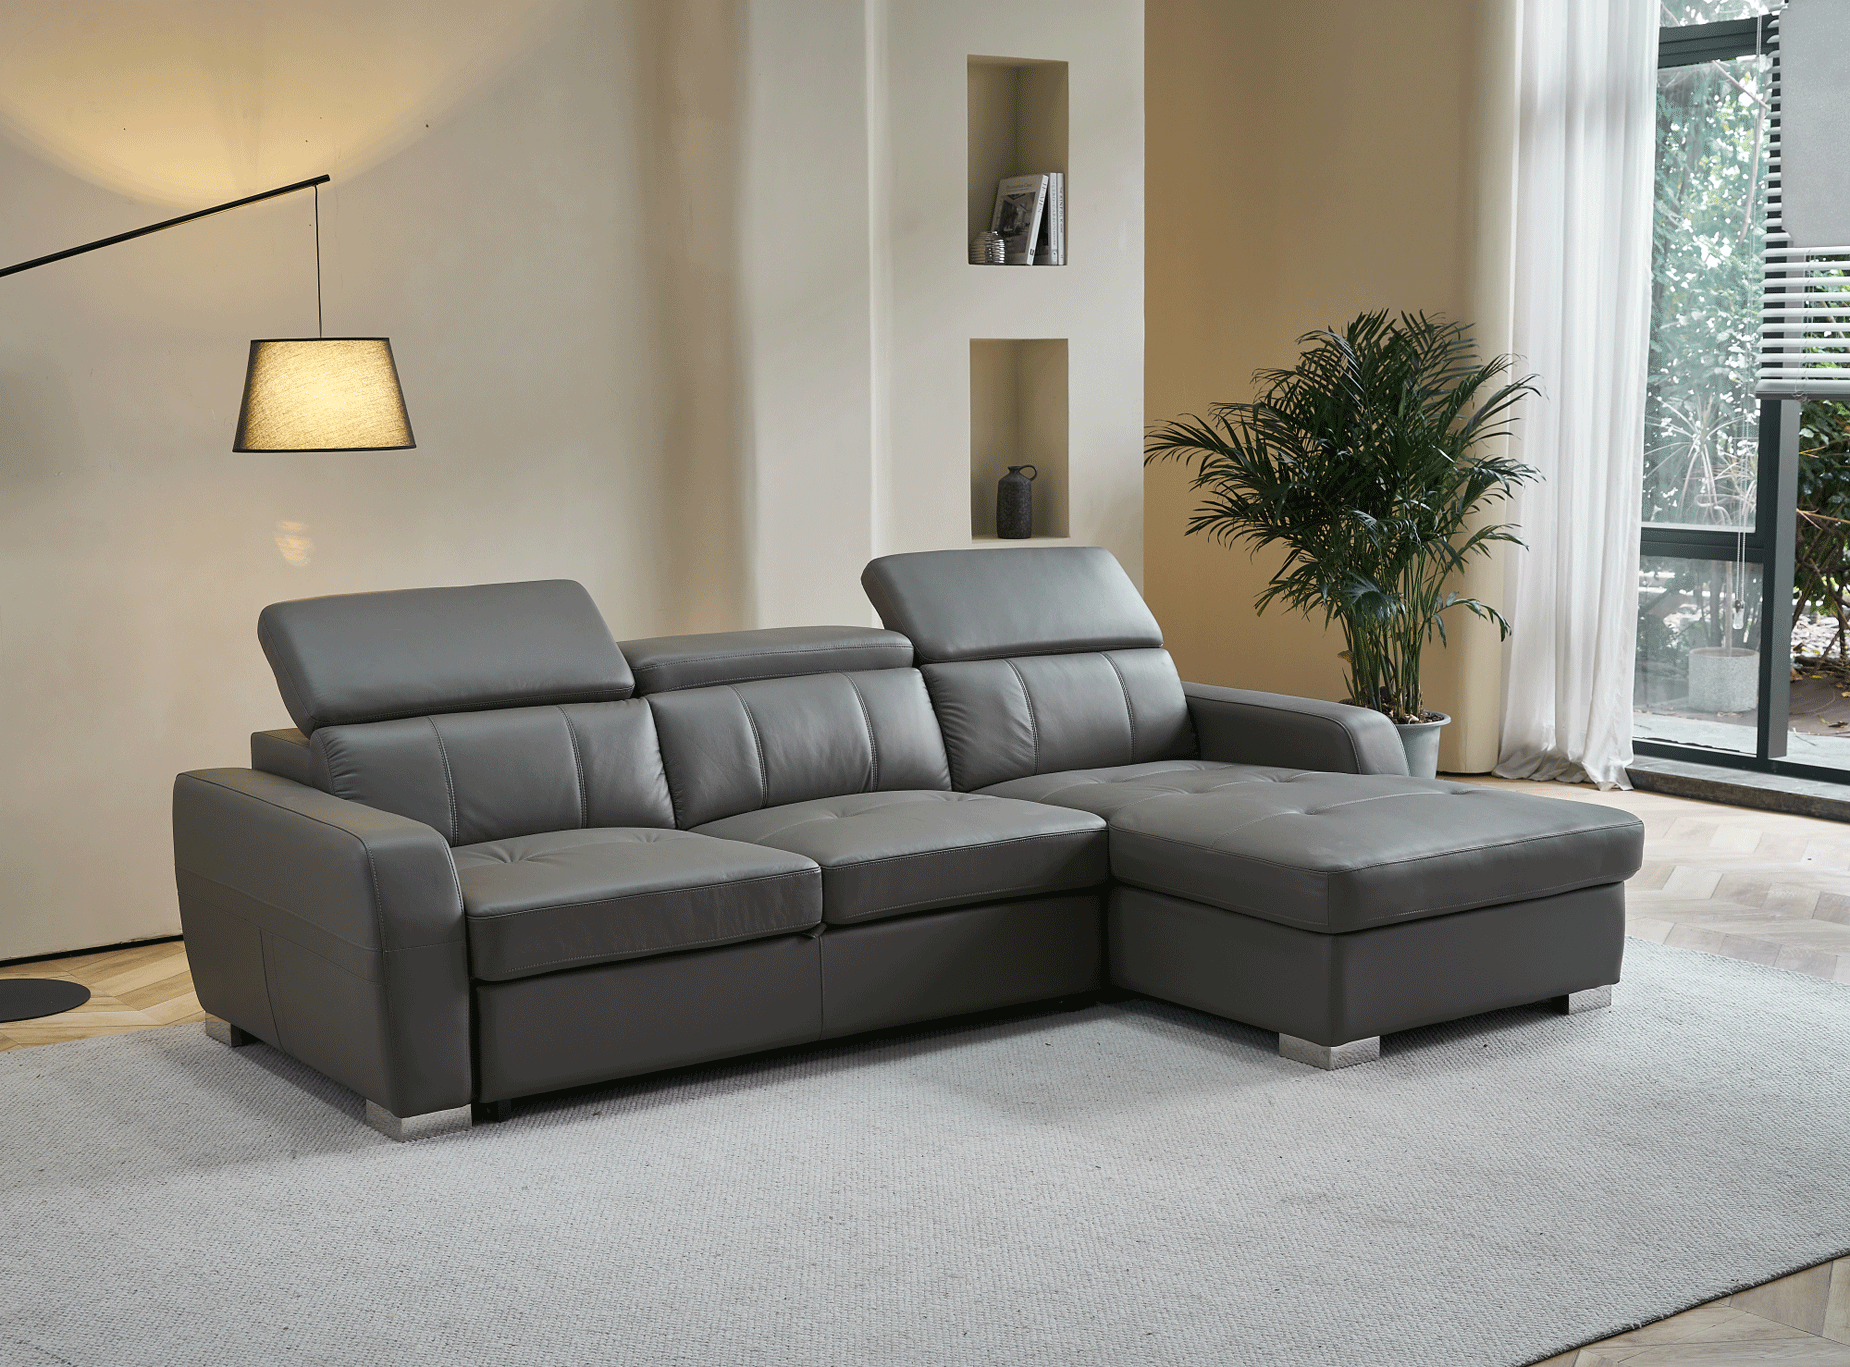 Brands IR Living Collection 1822 GREY Sectional Right w/Bed